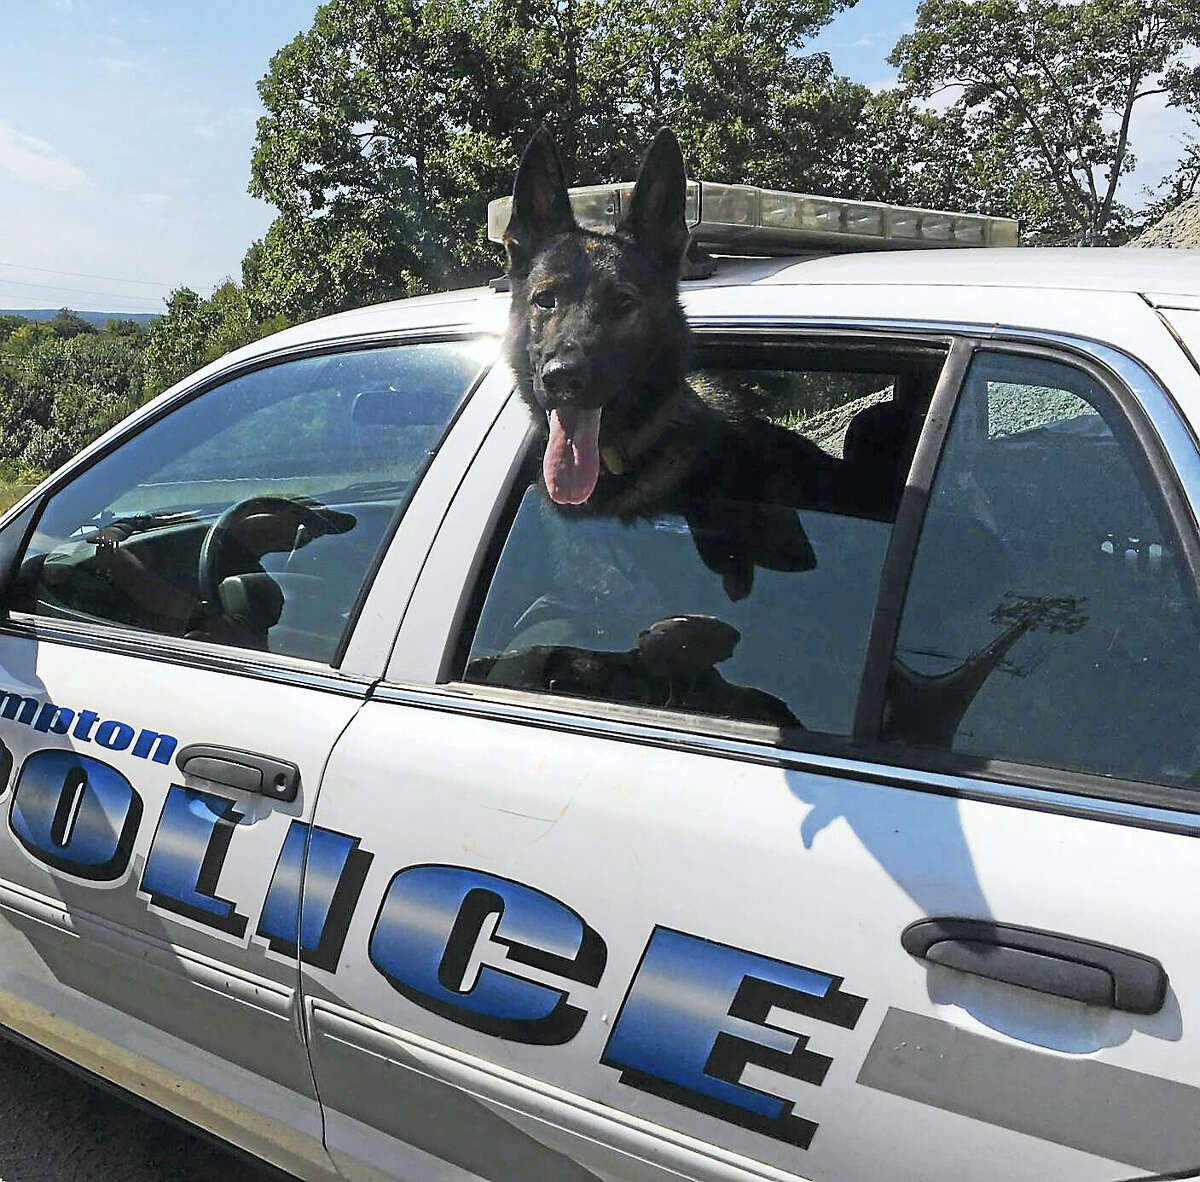 East Hampton Police Department’s newest officer is canine Ringer, who’s making his way through an intense, 16-week training at the Connecticut Police Academy.